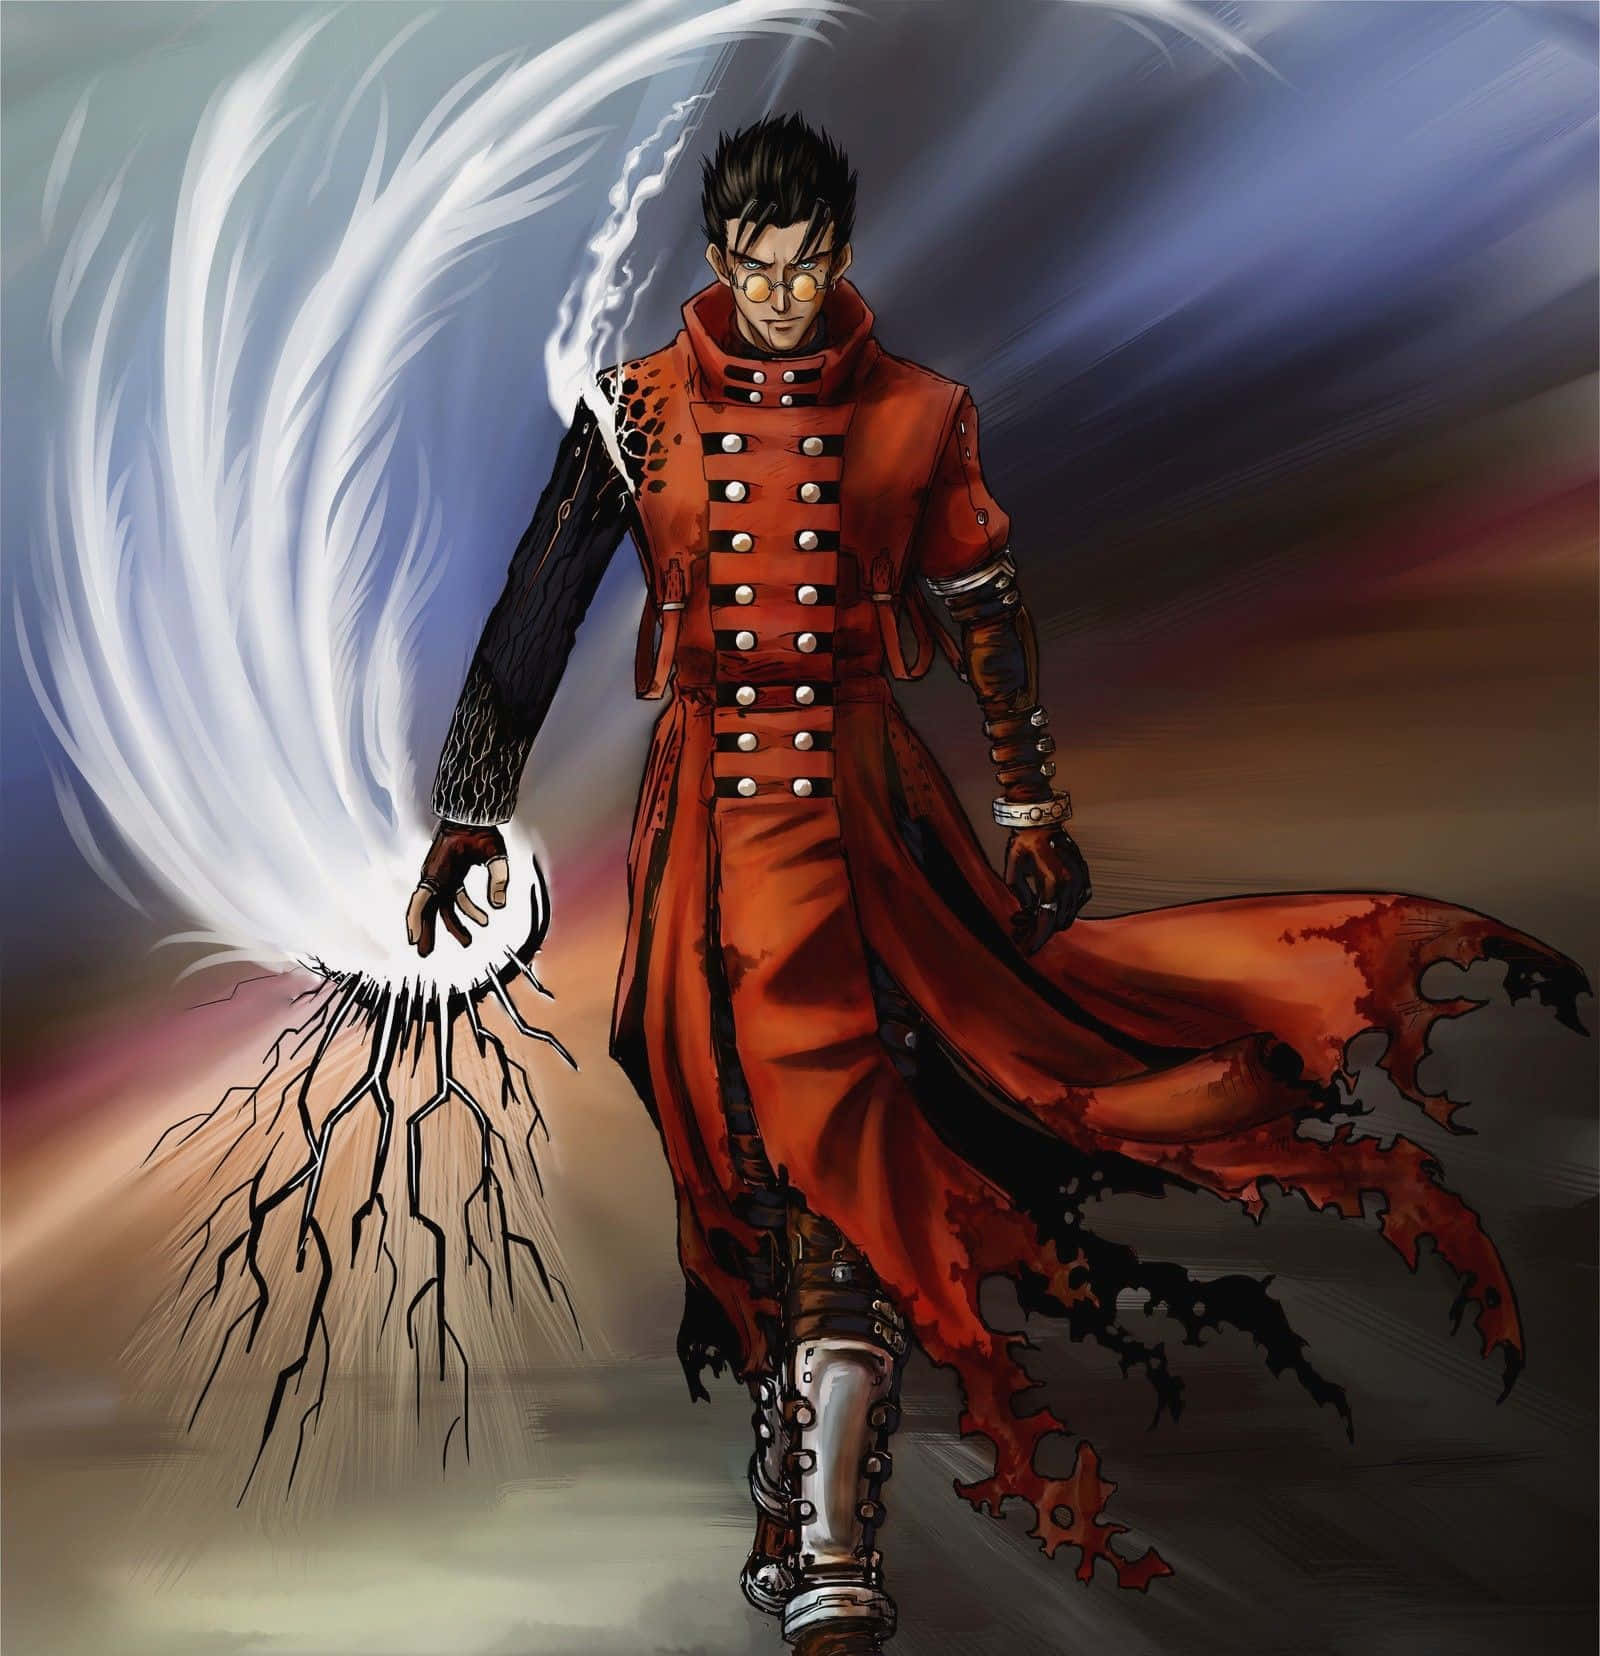 Vash the Stampede - A Man with a $$60 Billion Double Dollar Bounty